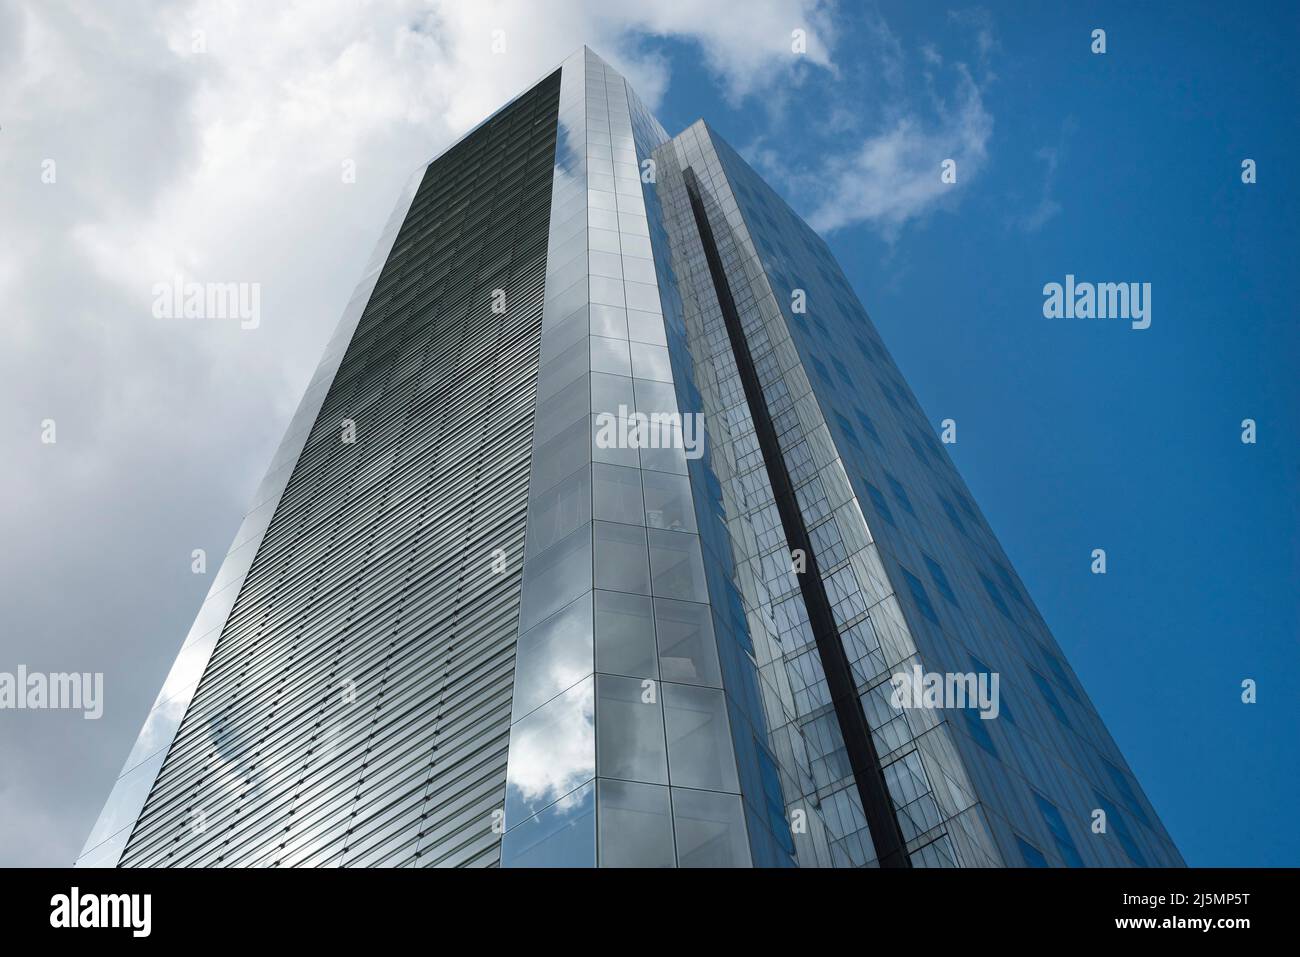 Modern urban architecture: Residential tower block clad in glass with a facetted design and large louvred elevation in London. Stock Photo